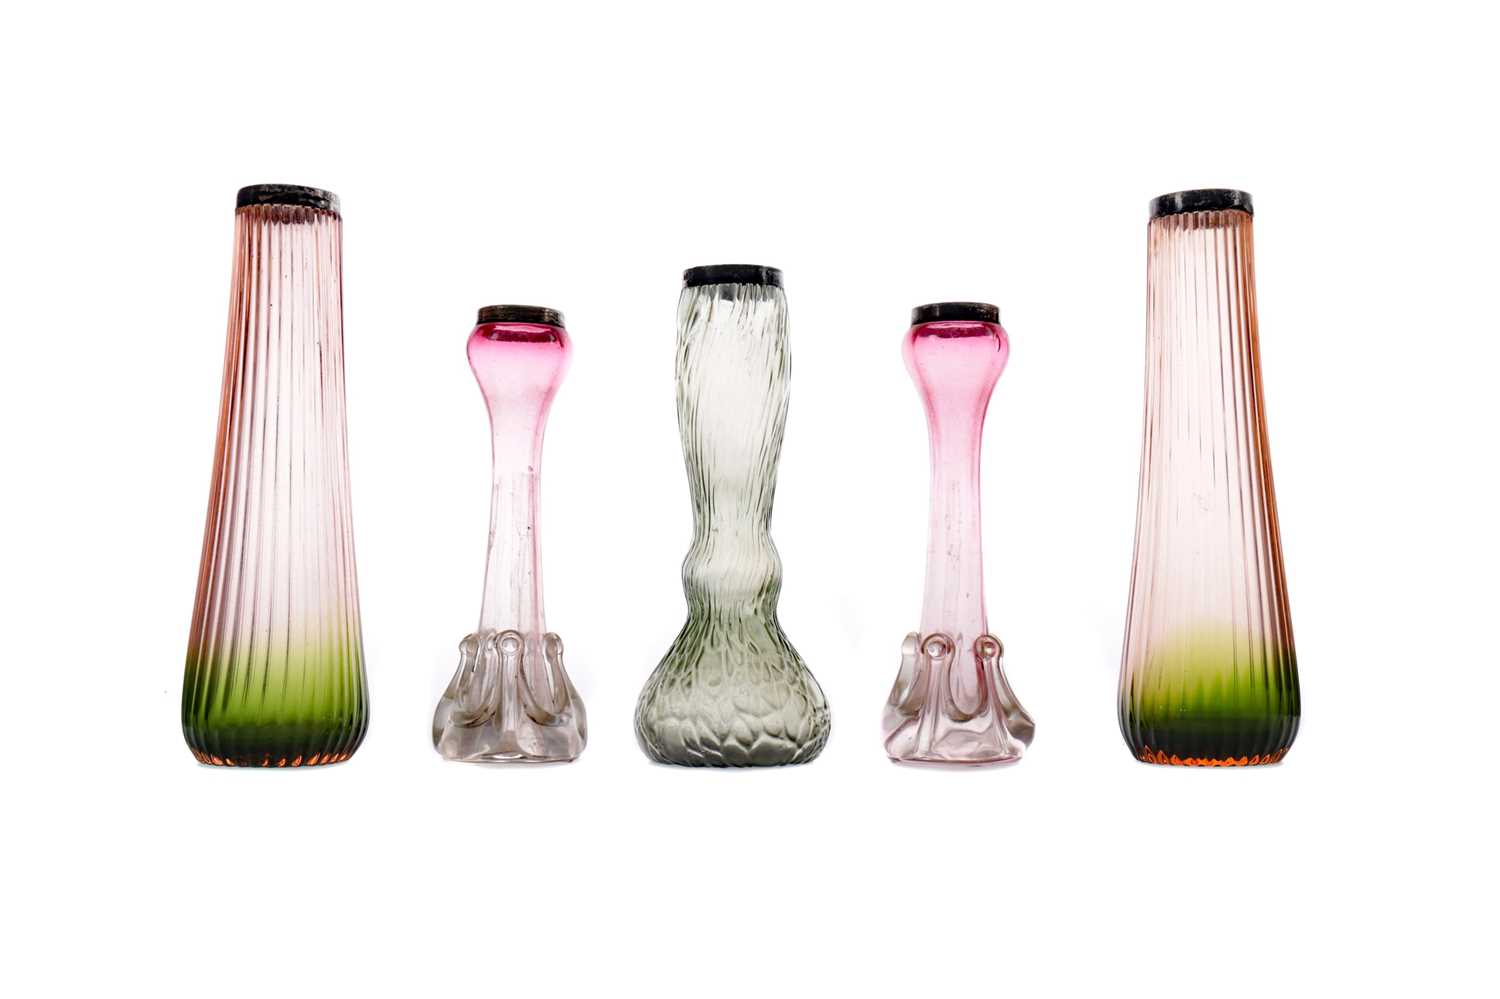 Lot 1076 - AN ART NOUVEAU IRIDESCENT GLASS VASE ALONG WITH TWO PAIRS OF SILVER MOUNTED VASES